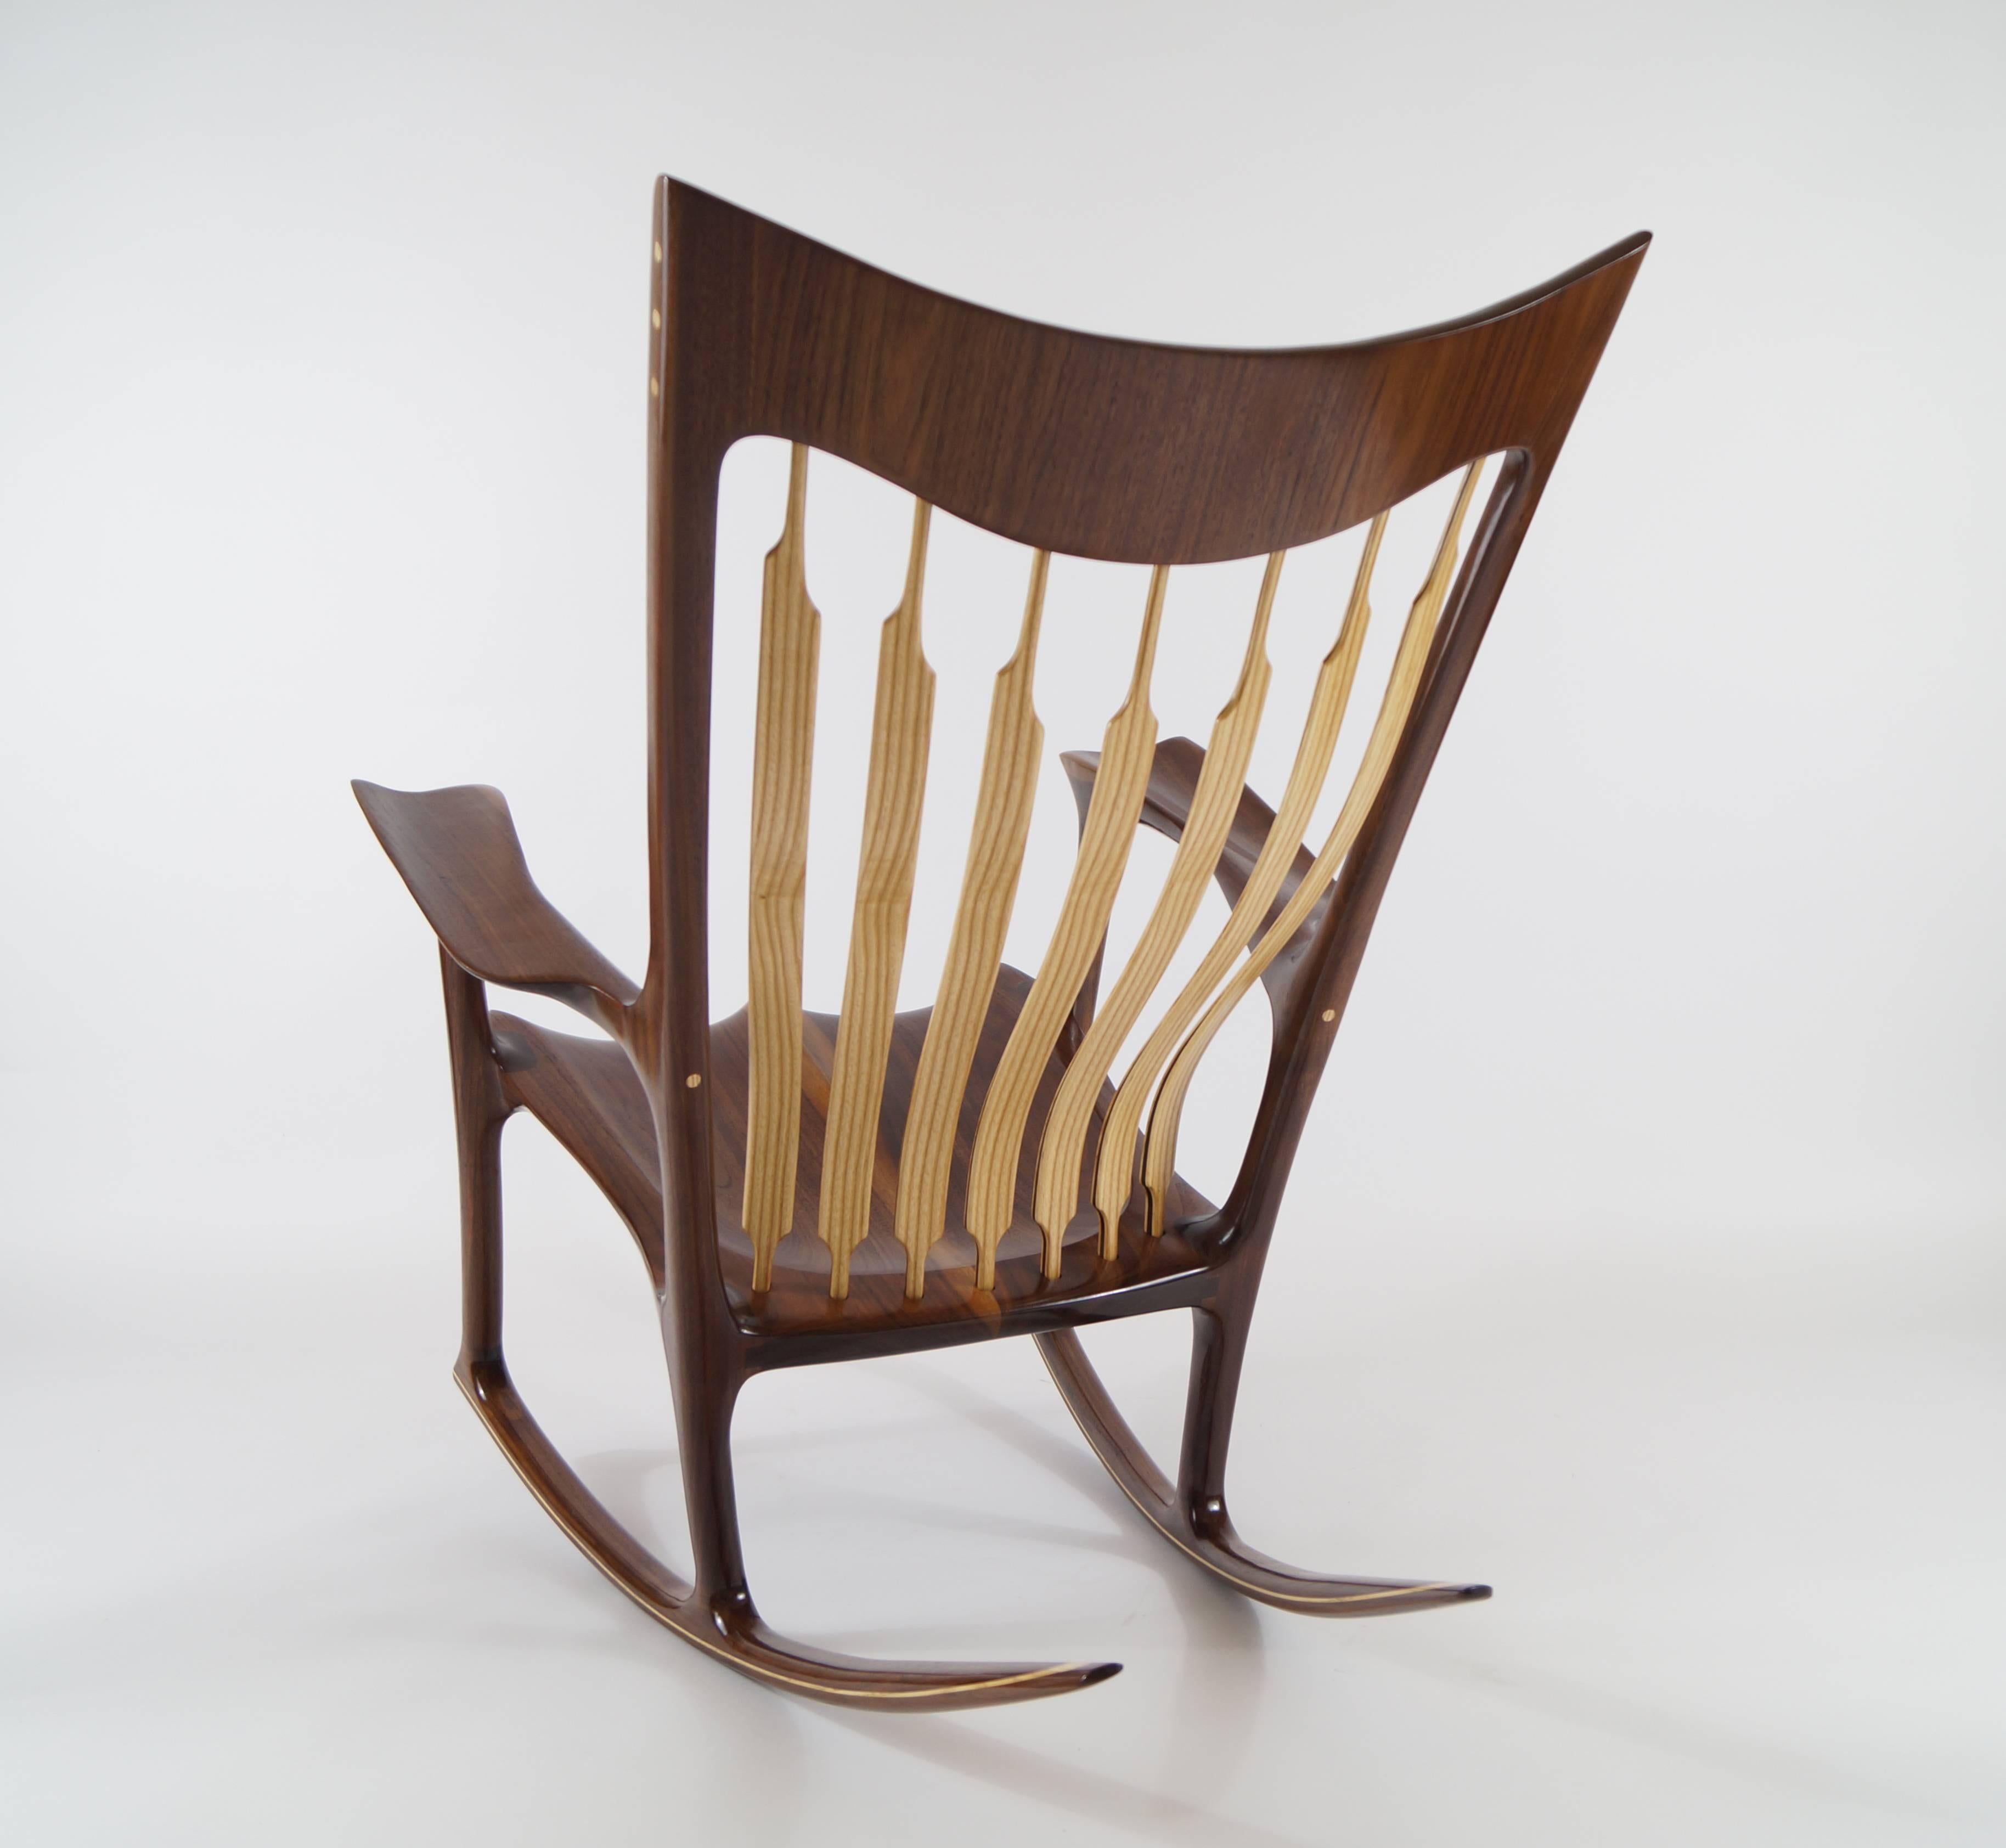 handcrafted chair